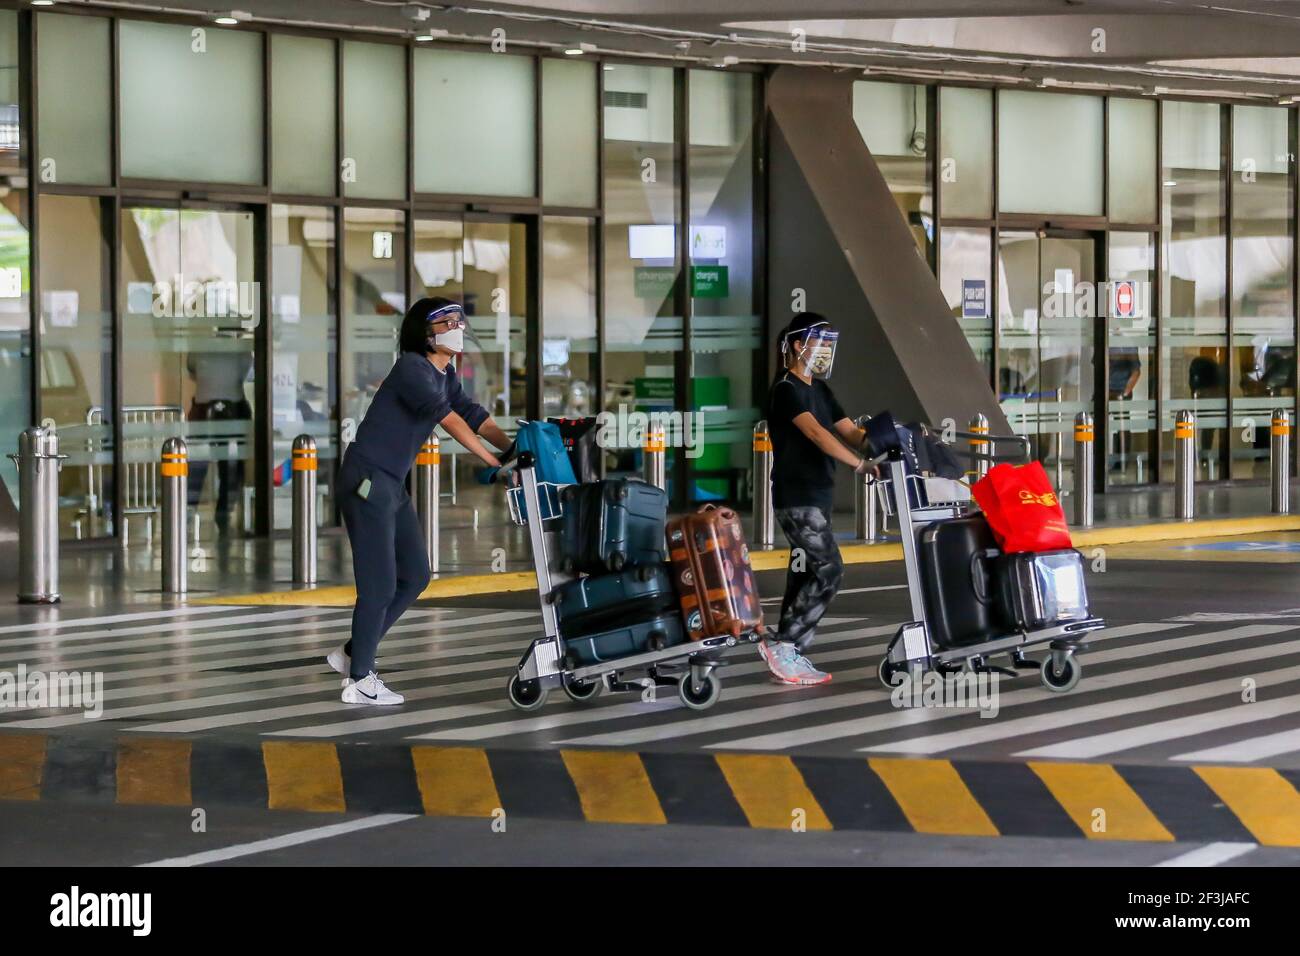 (210317) -- MANILA, March 17, 2021 (Xinhua) -- Arriving passengers wearing protective shields are seen inside the Terminal 1 of the Ninoy Aquino International Airport in Manila, the Philippines, on March 17, 2021. The Philippines said it will temporarily suspend the entry of foreigners and some citizens as the Southeast Asian country battles a renewed spike in COVID-19 cases. In a statement issued on Tuesday night, the country's coronavirus task force said foreign citizens and returning nationals who had not been working overseas will not be able to enter the country from March 20 until April Stock Photo